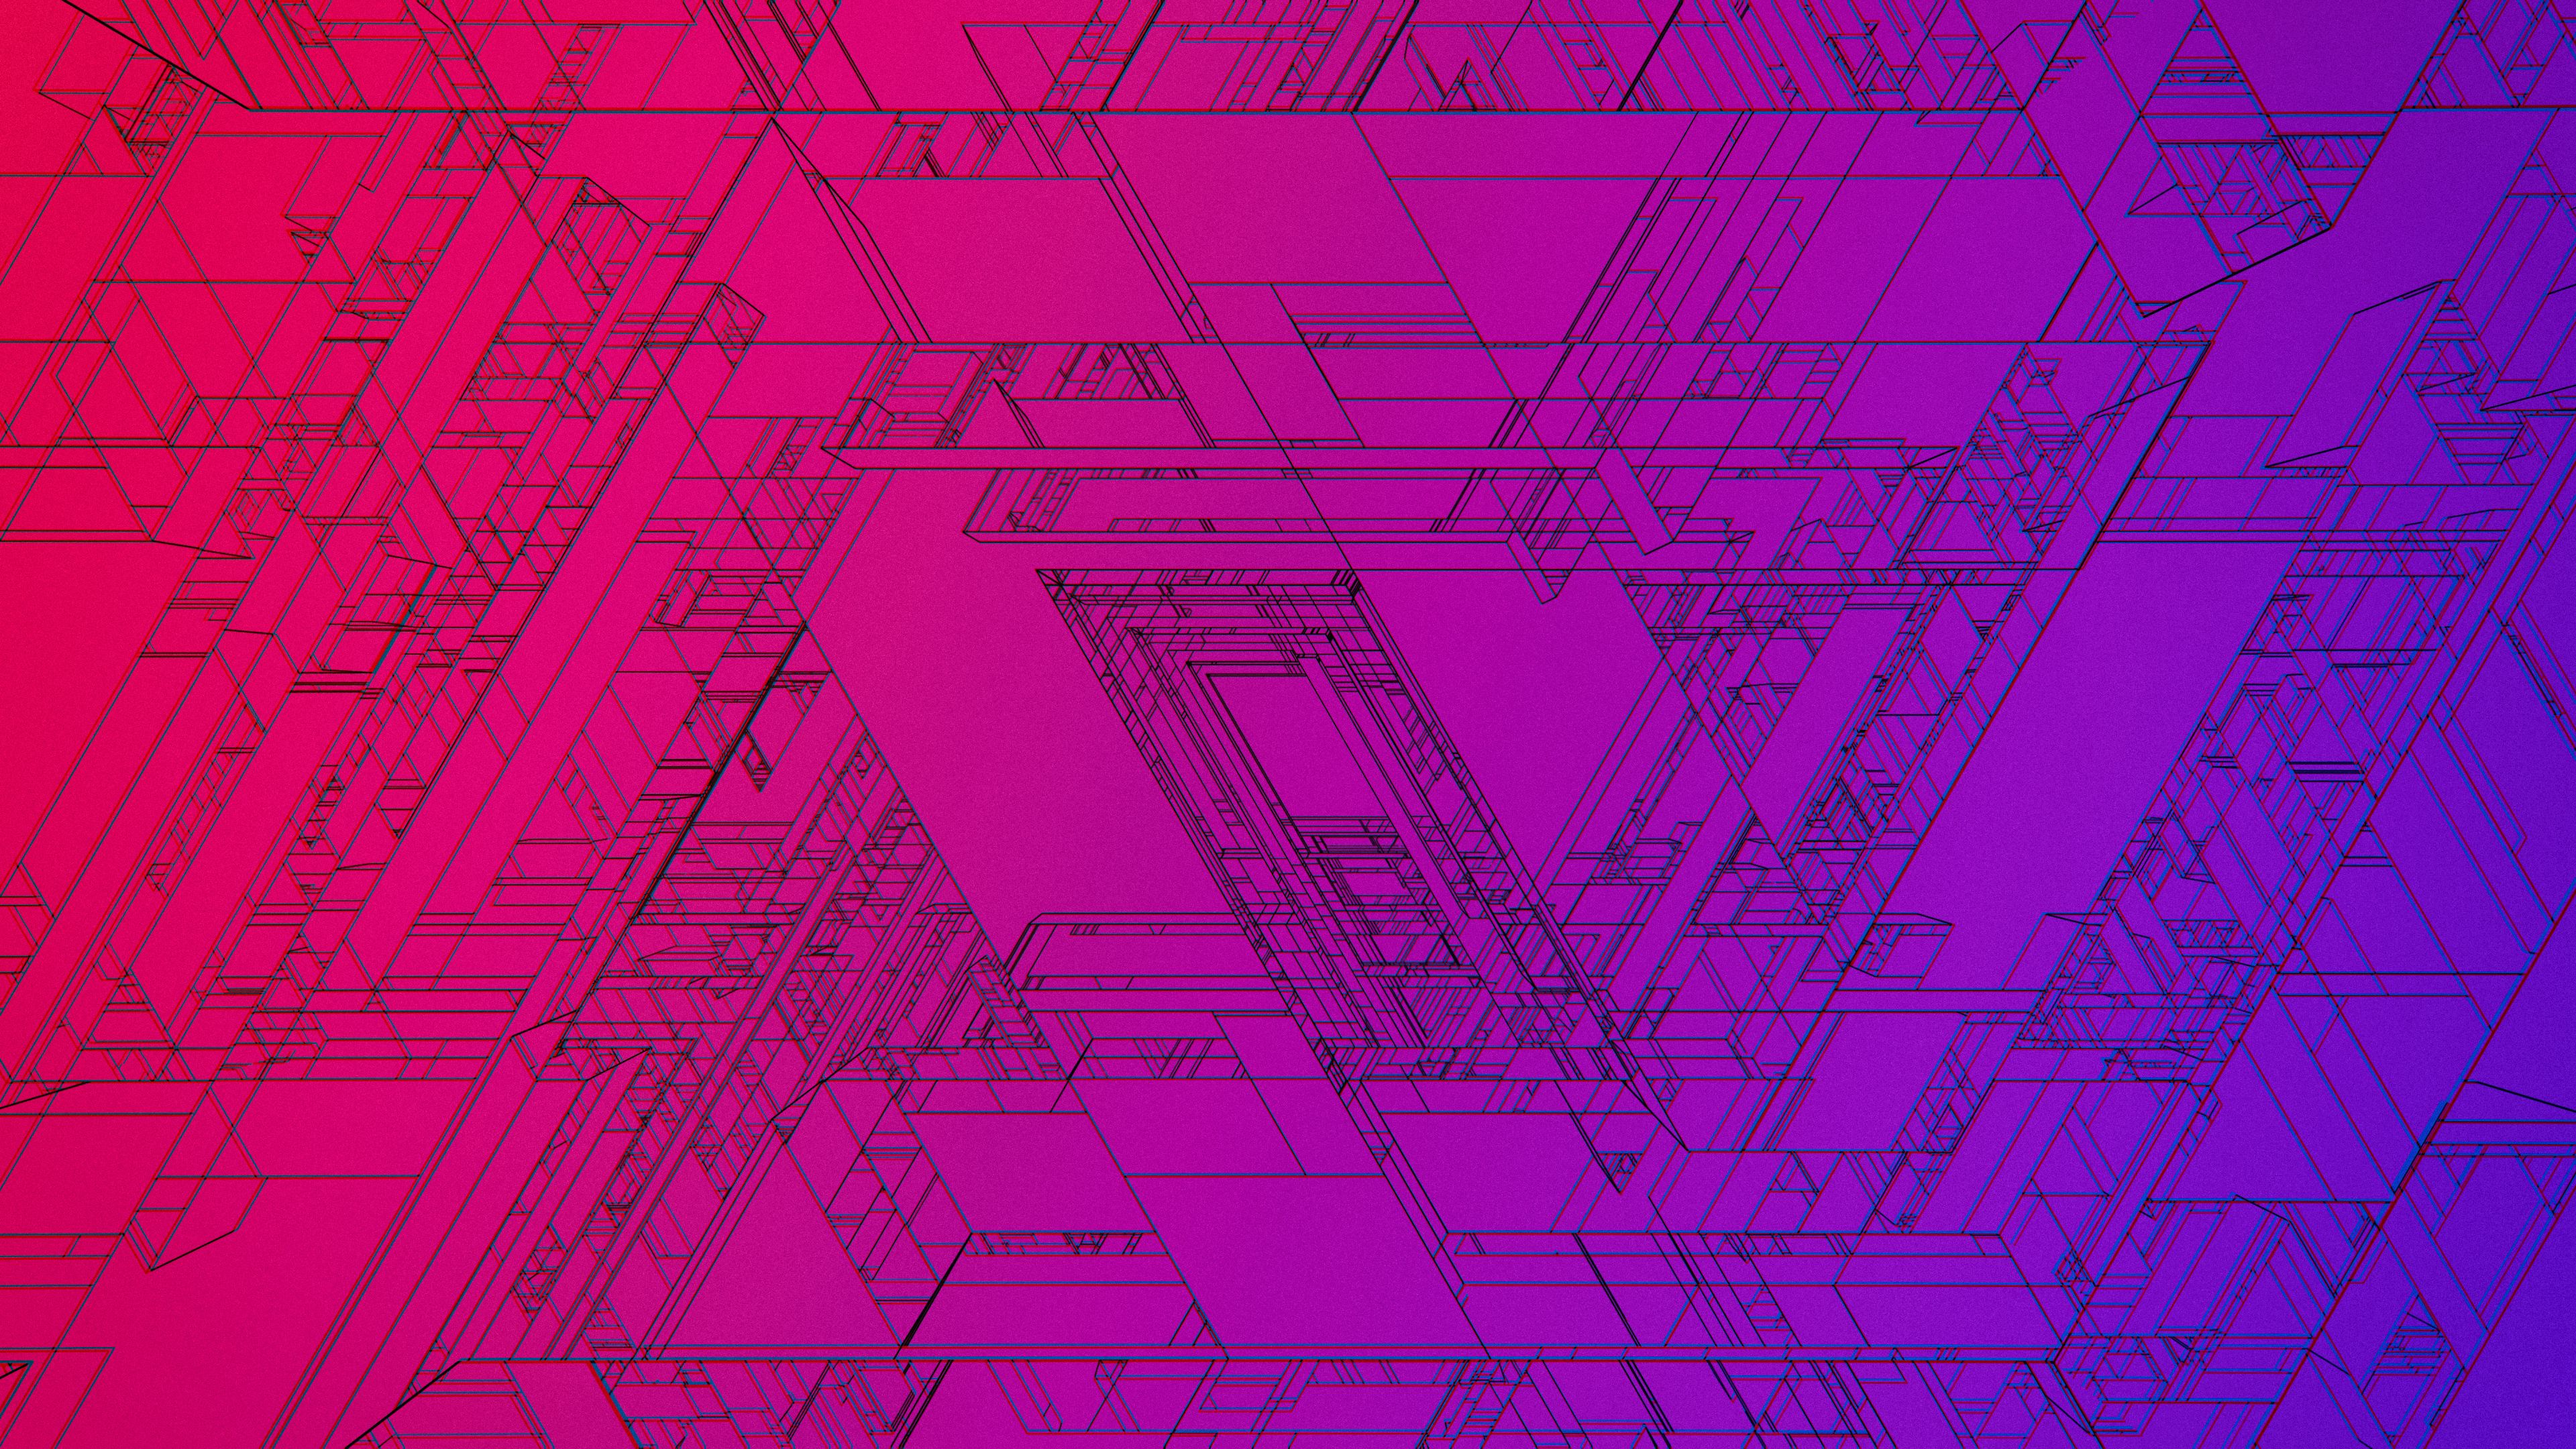 Wallpapers from The Verge - The Verge